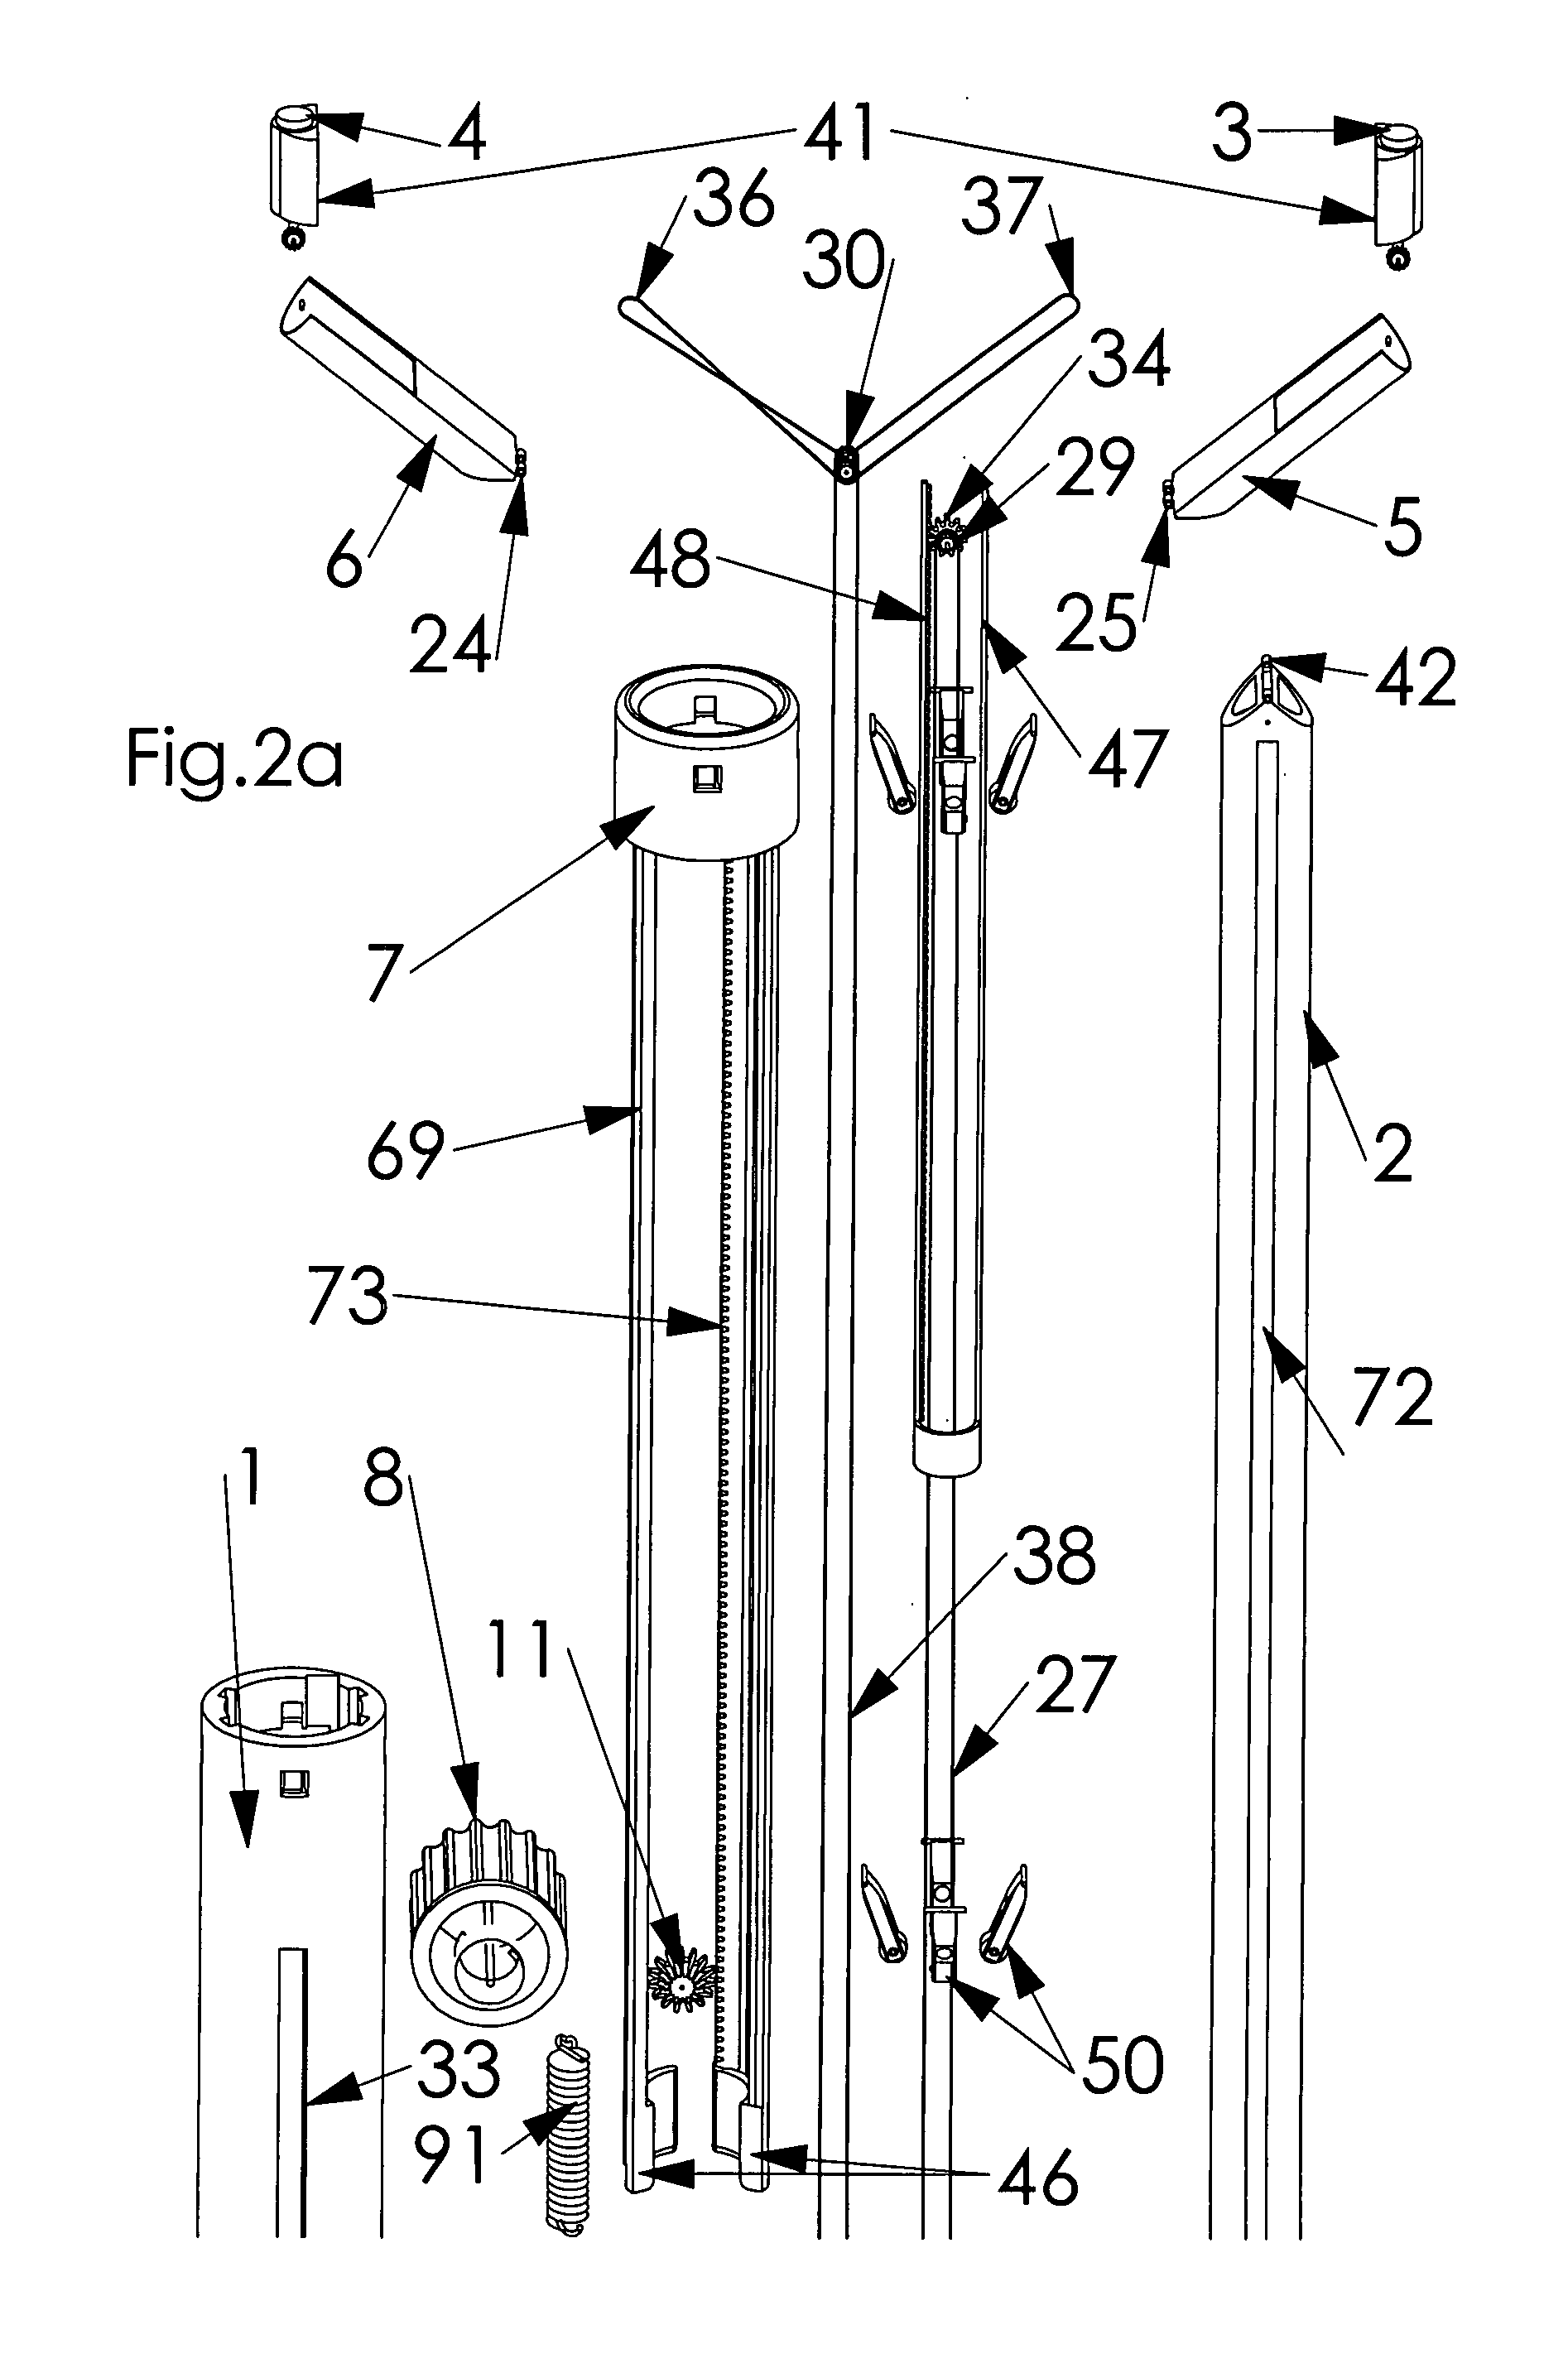 Endoscopic System and Method for Therapeutic Applications and Obtaining 3-Dimensional Human Vision Simulated Imaging With Real Dynamic Convergence